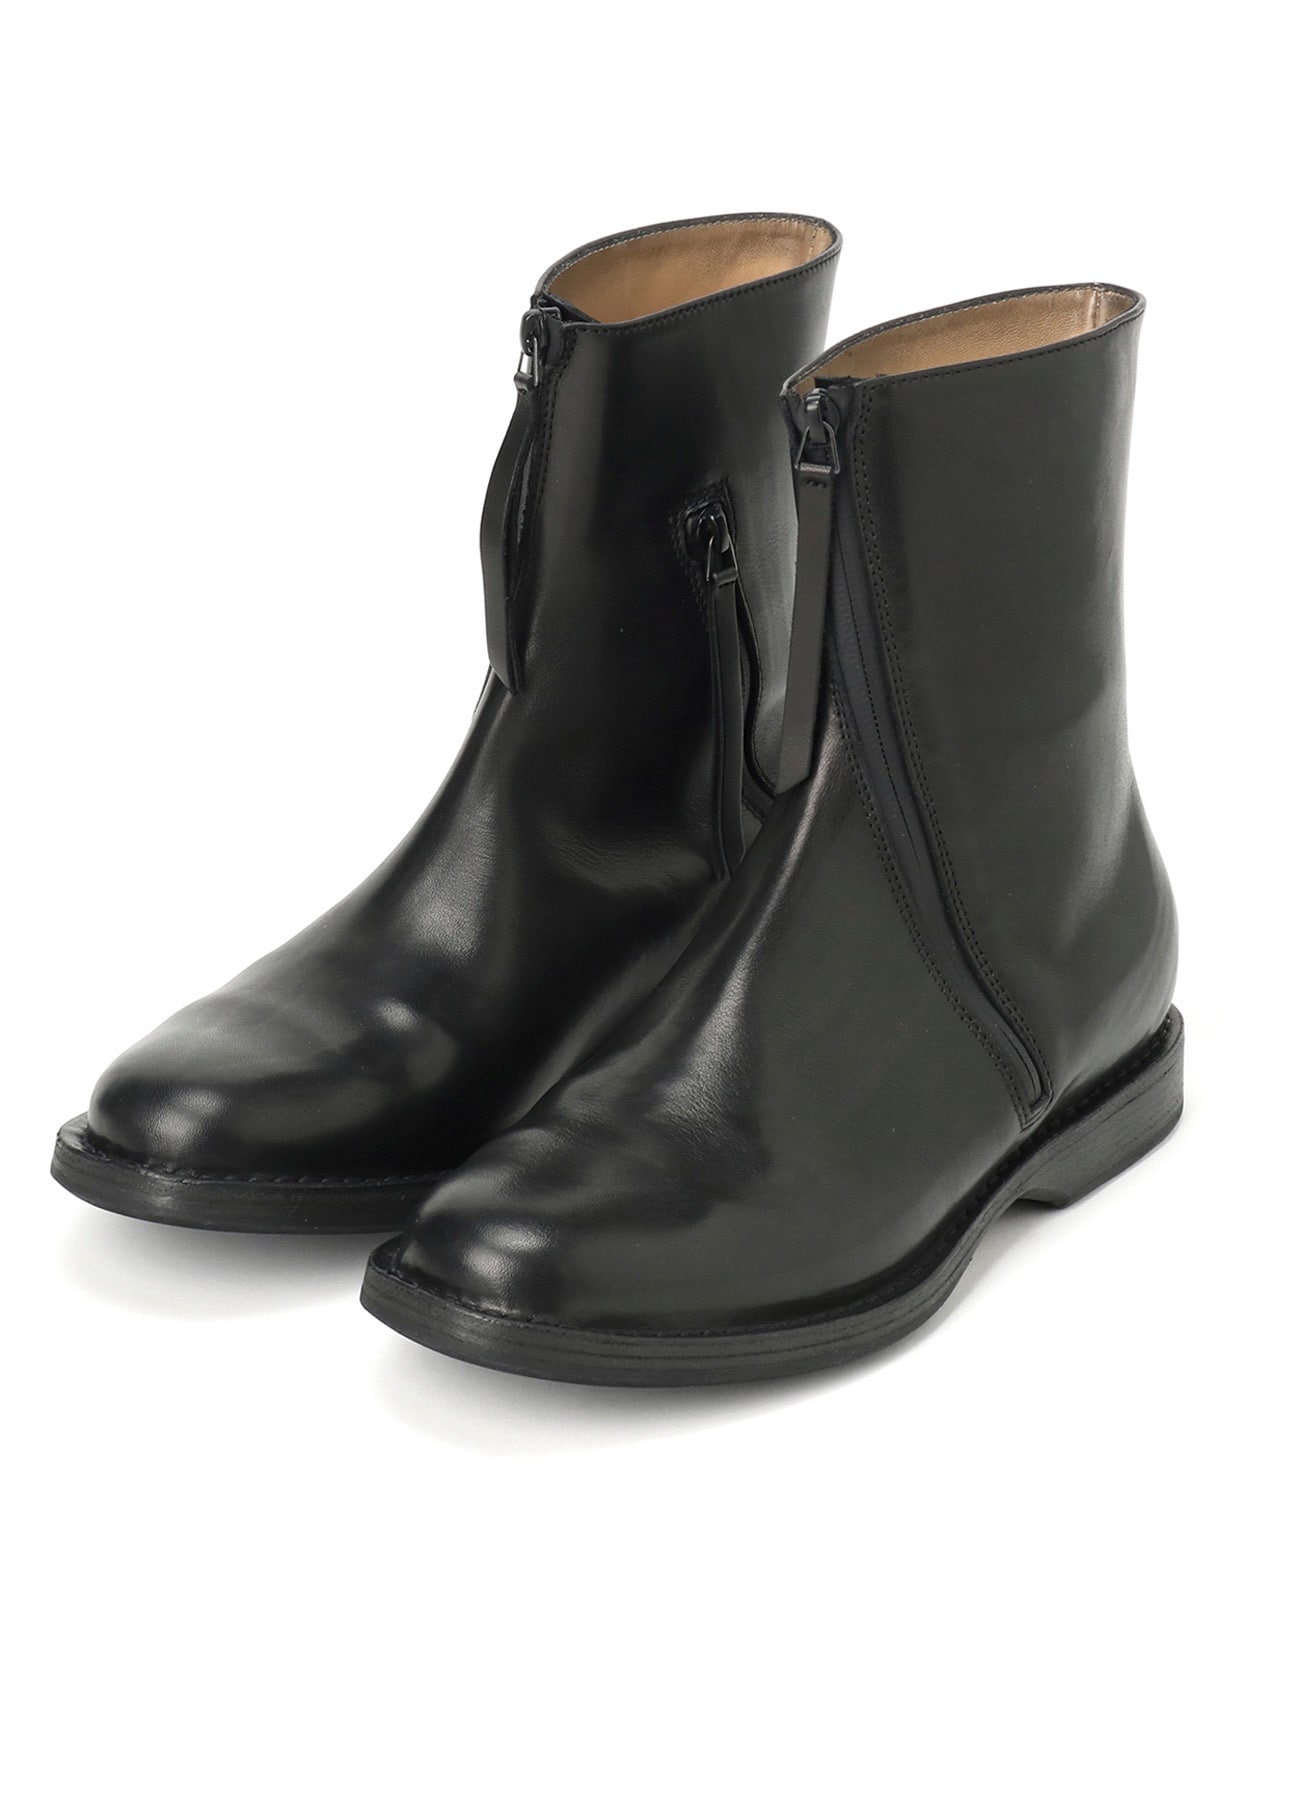 WAXED CALF LEATHER CURVED ZIPPER BOOTS(26 Black): Vintage｜THE 